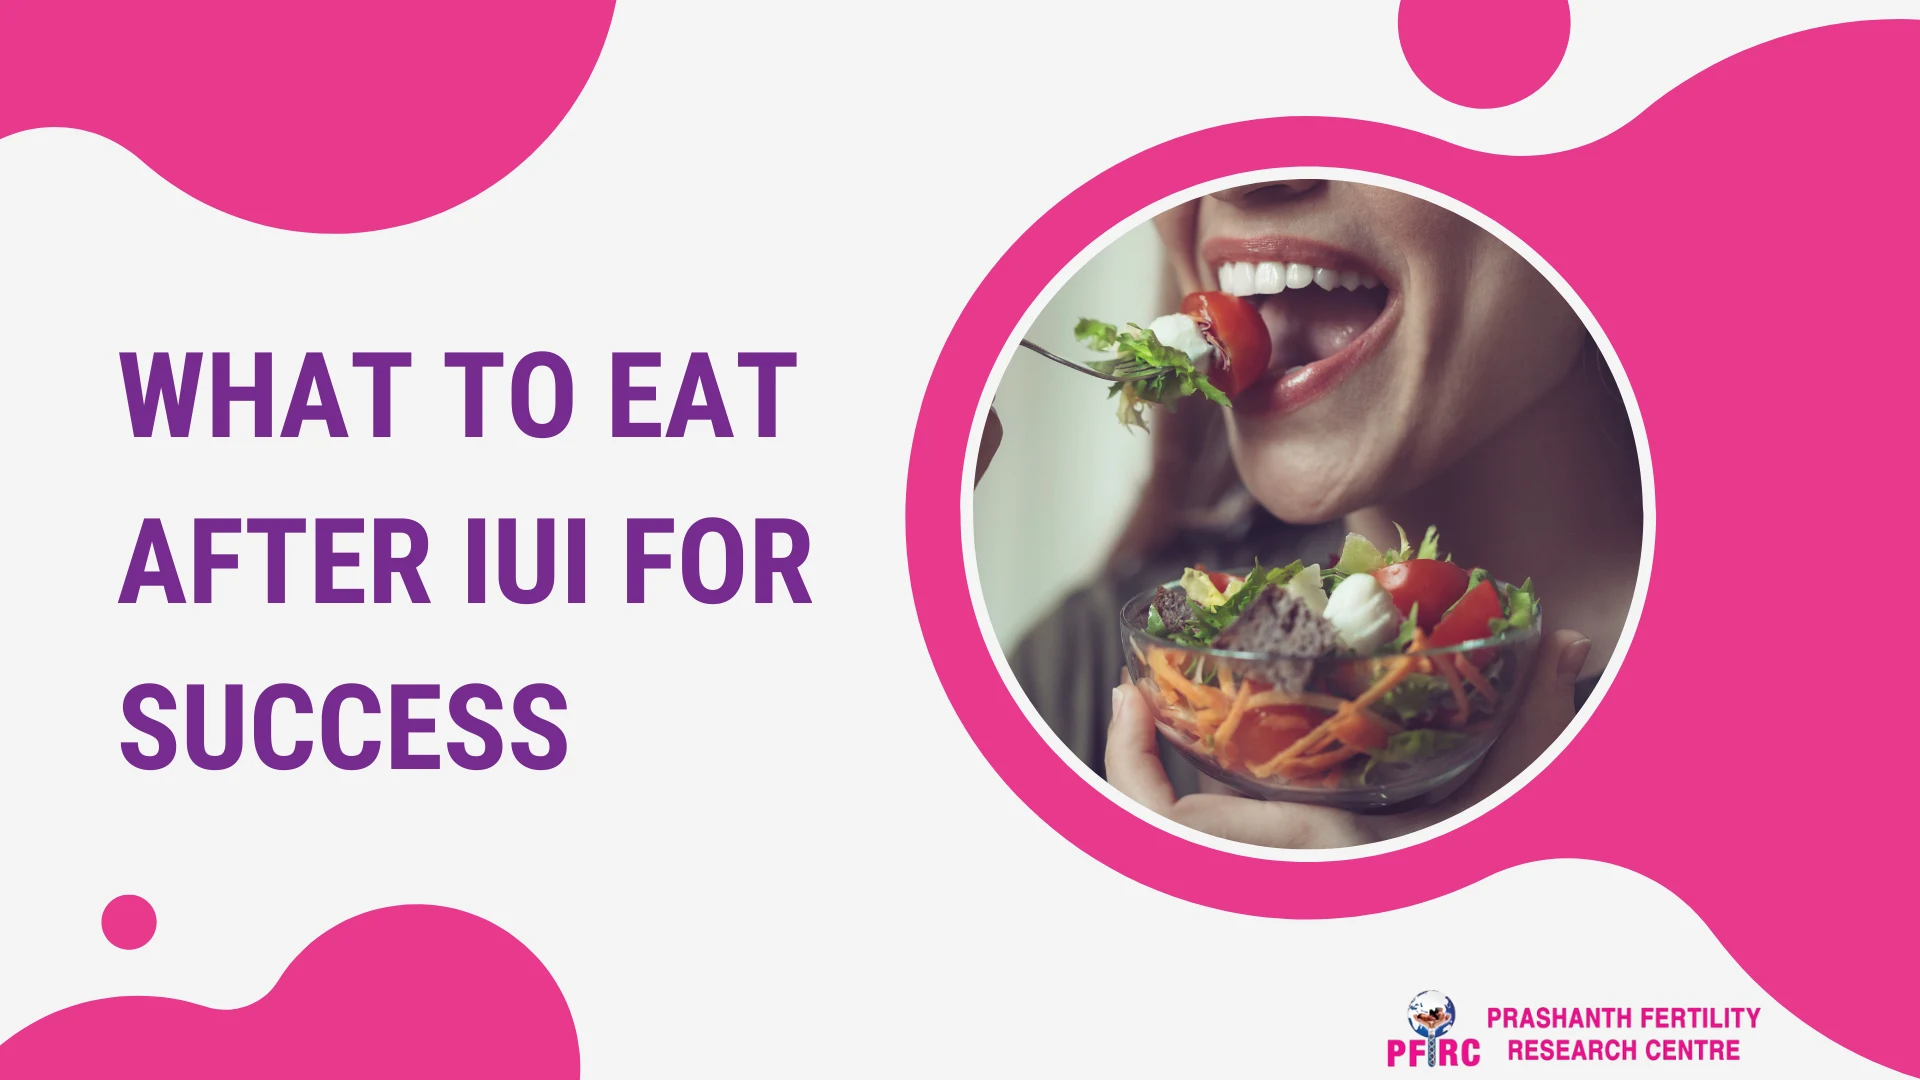 What To Eat After IUI For Success